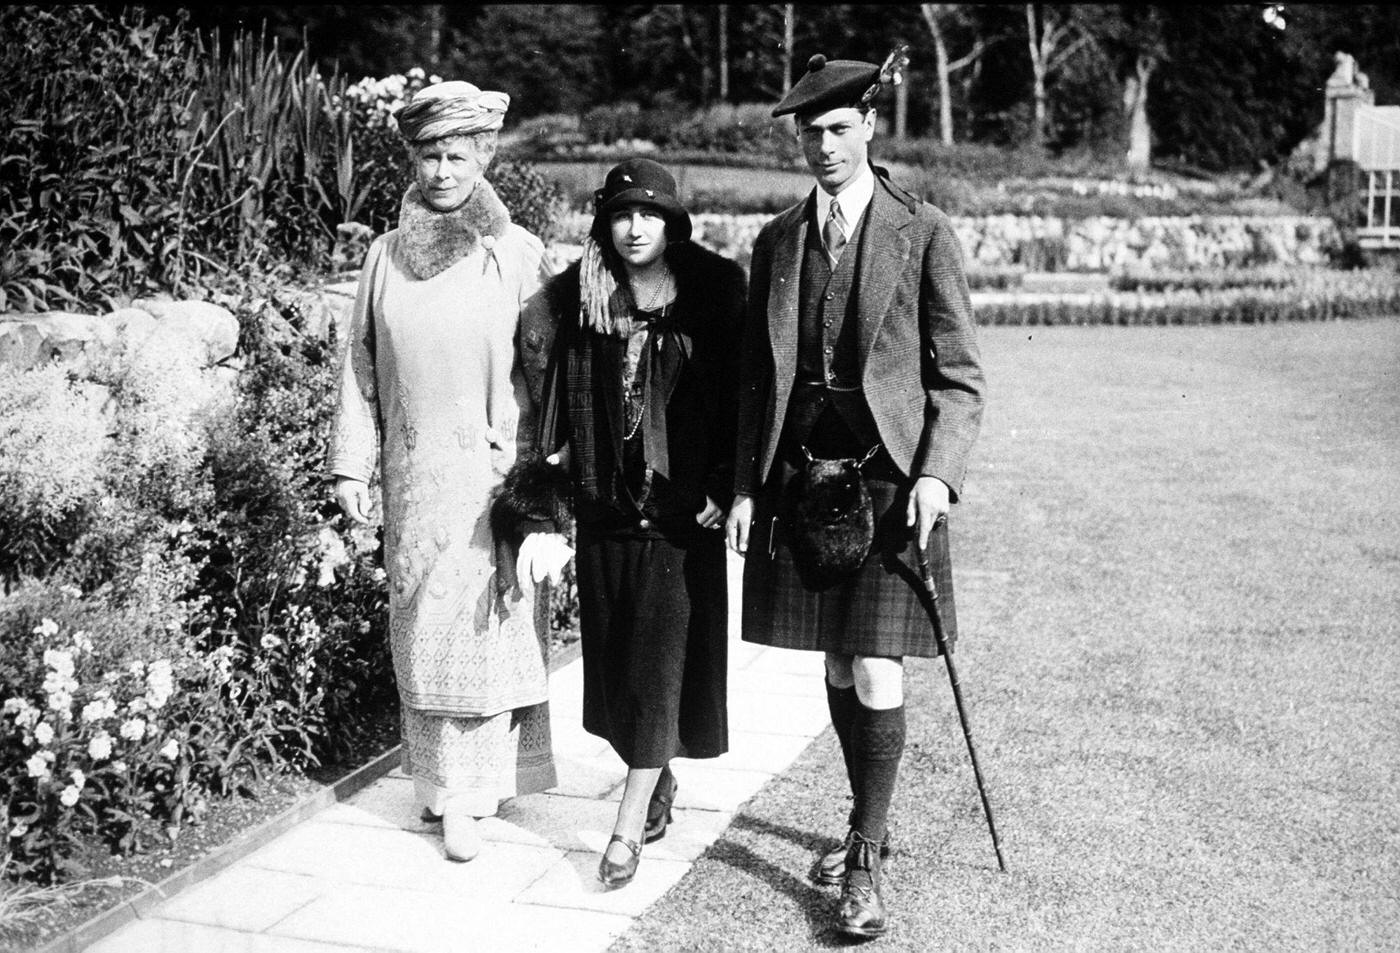 Queen Mary with the Duke and Duchess of York, later King George VI and the Queen Mother.